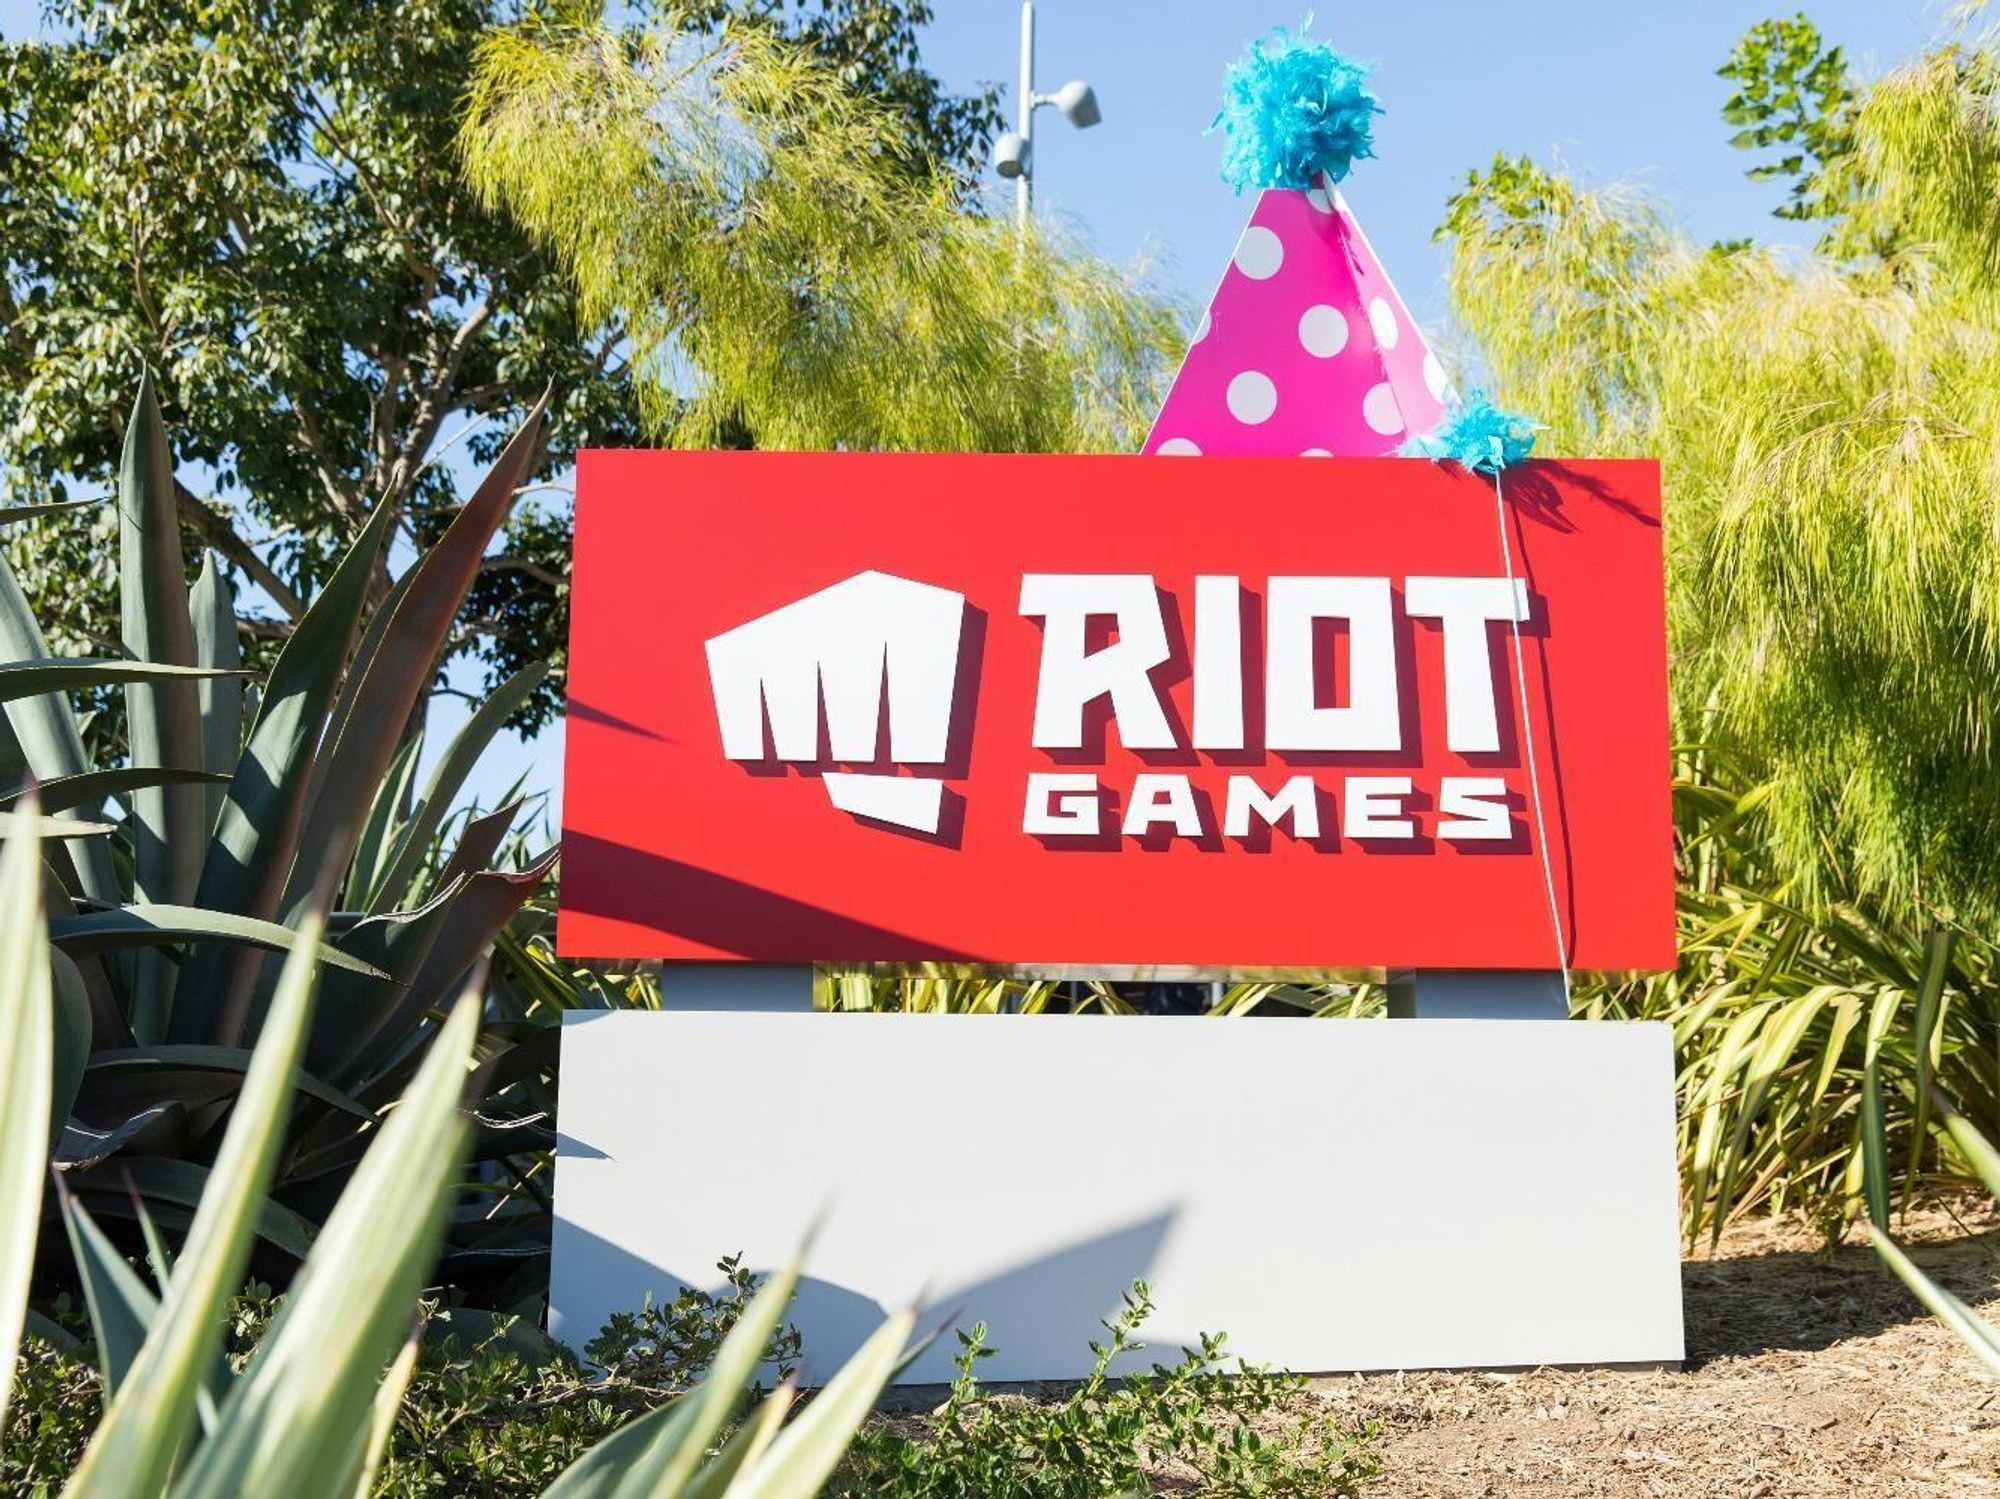 A Day in the Life of: Game Software Developer at Riot Games